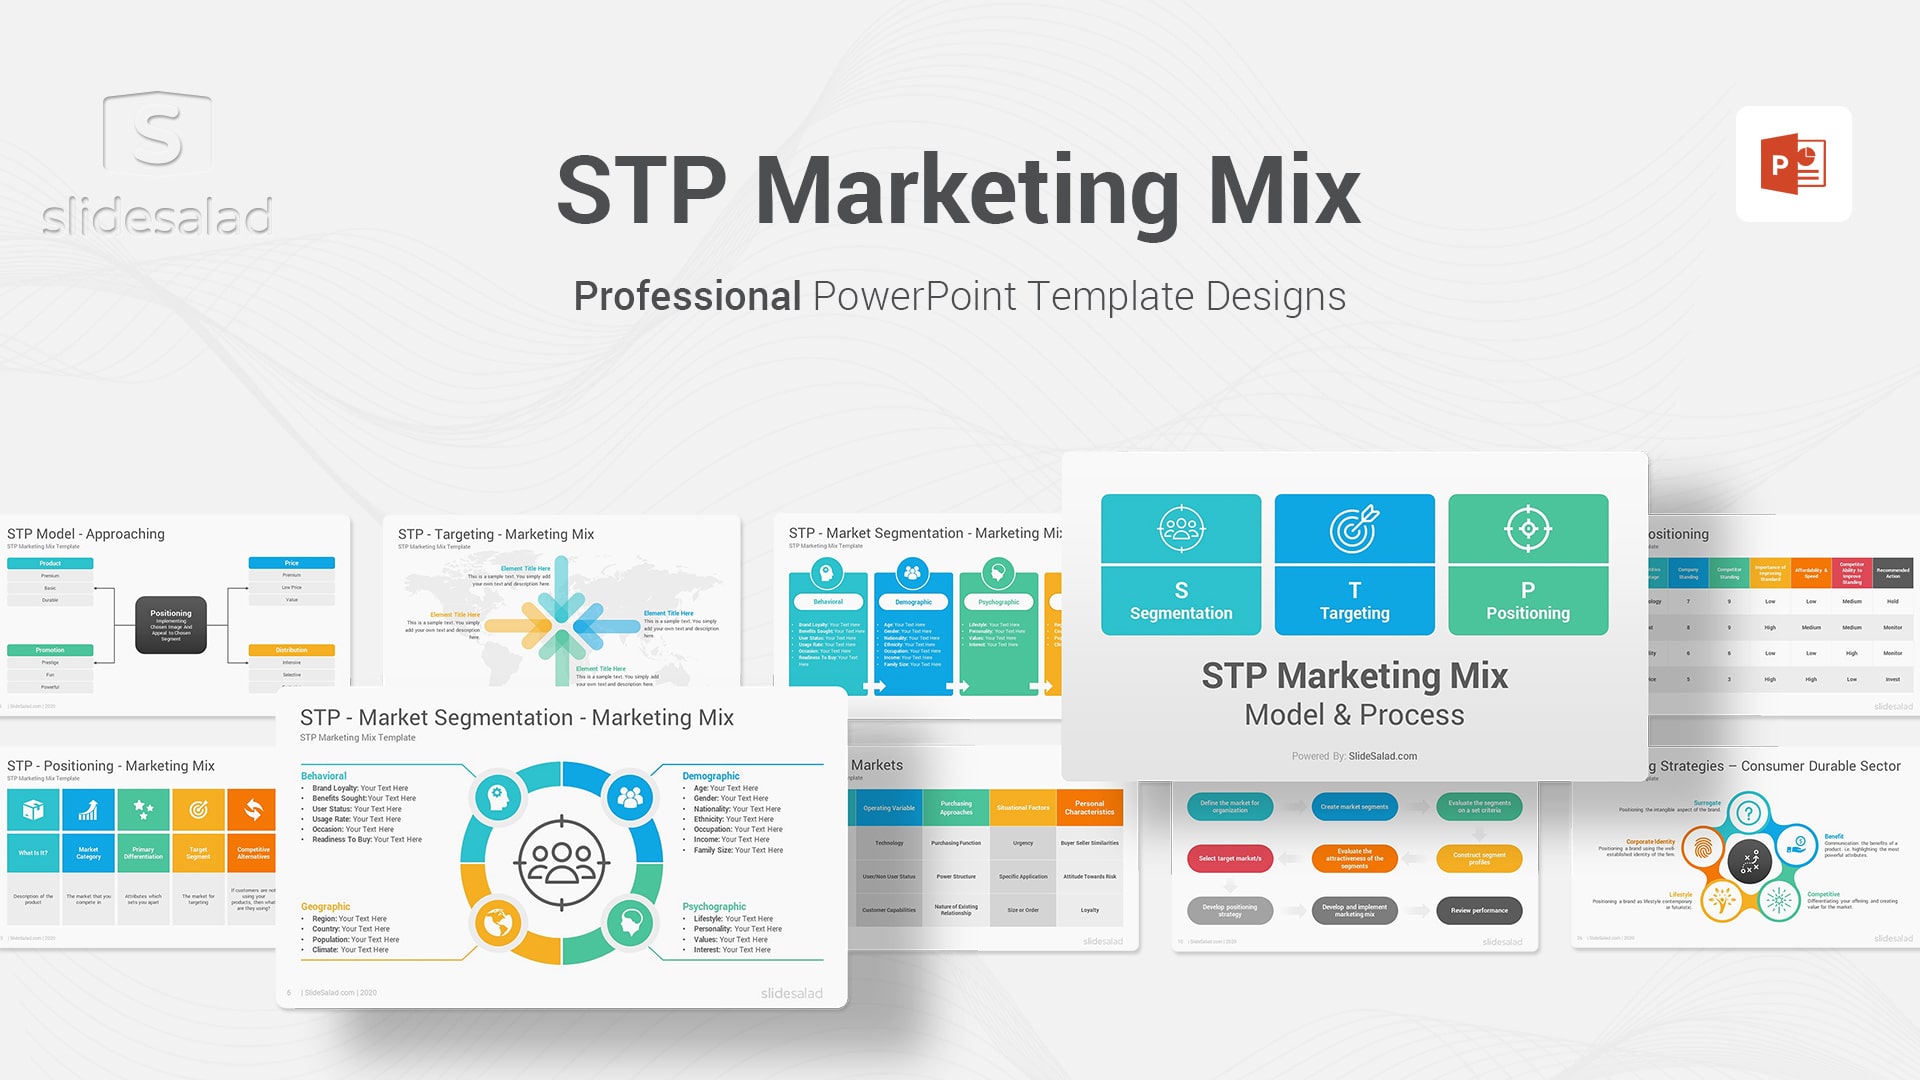 STP Marketing Mix PowerPoint Template Diagrams - Most Popular Segmentation, Targeting, and Positioning Marketing Model